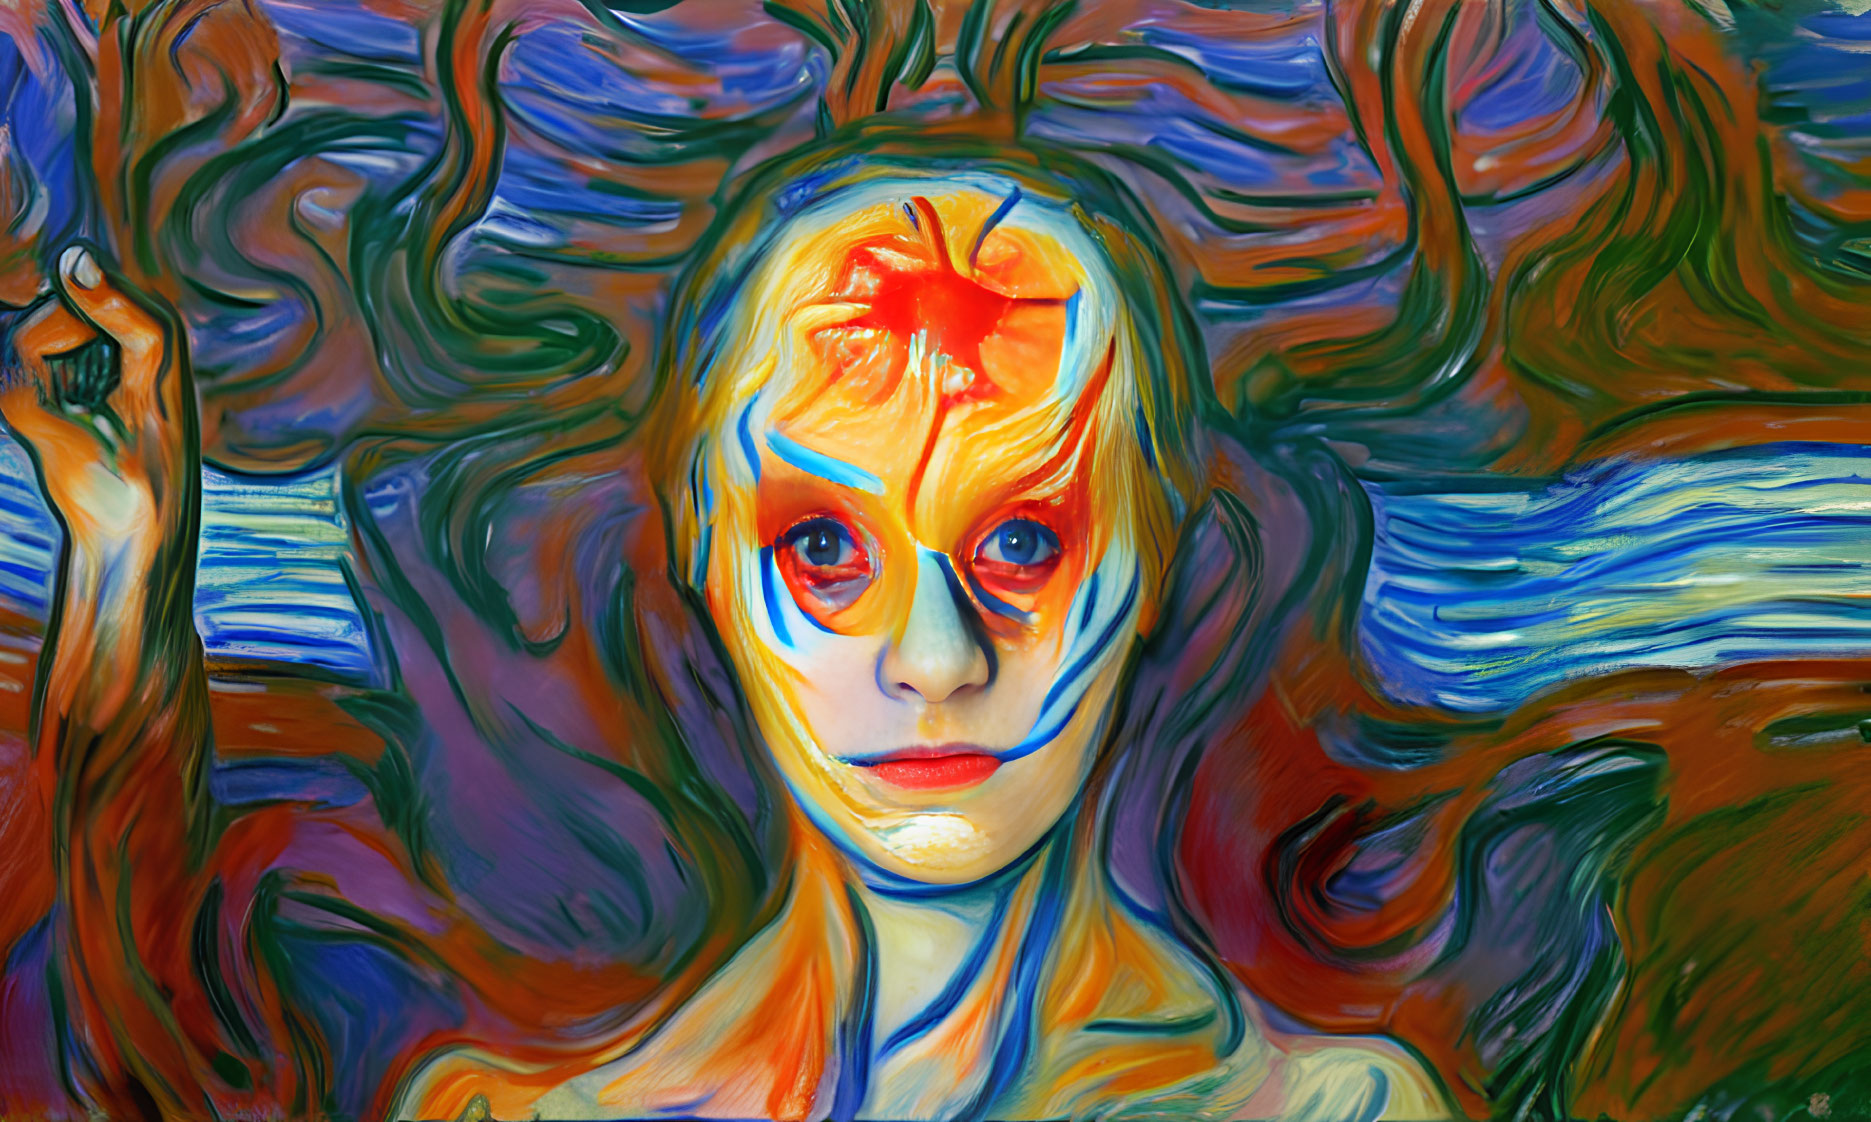 Colorful Abstract Painting of a Person in Swirling Brushstrokes